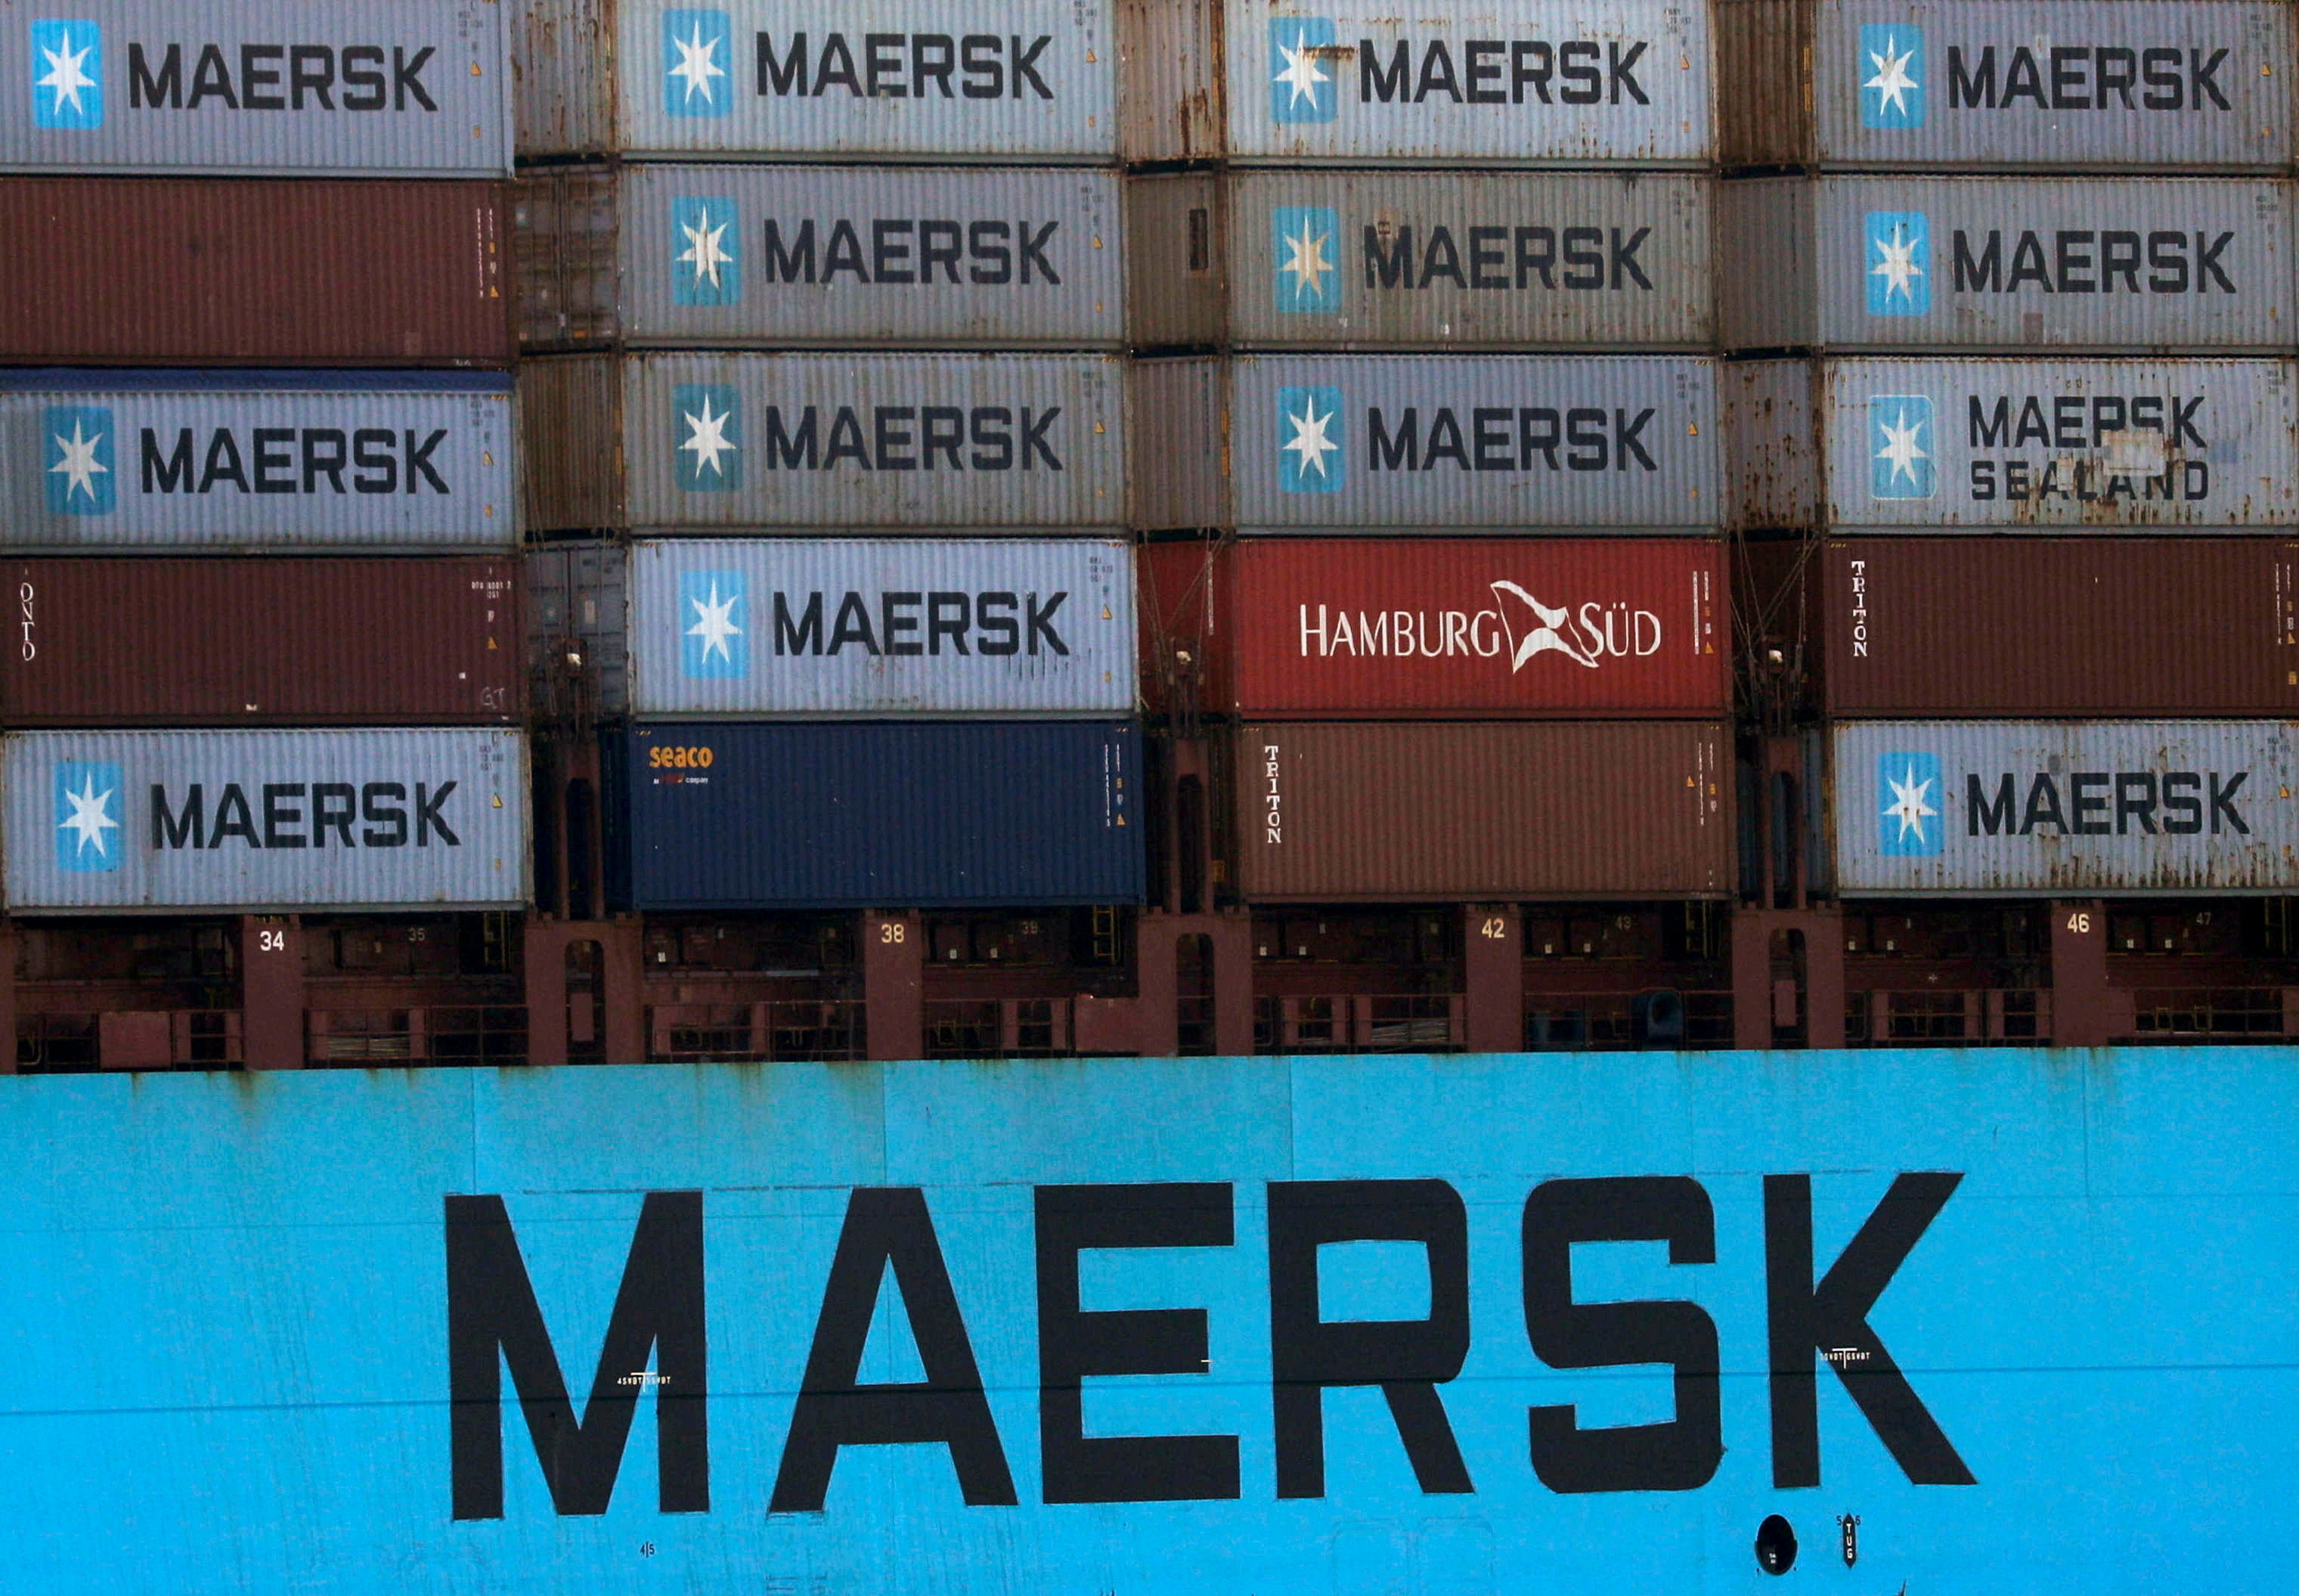 Shipping containers are transported on a Maersk Line vessel through the Suez Canal in Ismailia, Egypt July 7, 2021. REUTERS/Amr Abdallah Dalsh